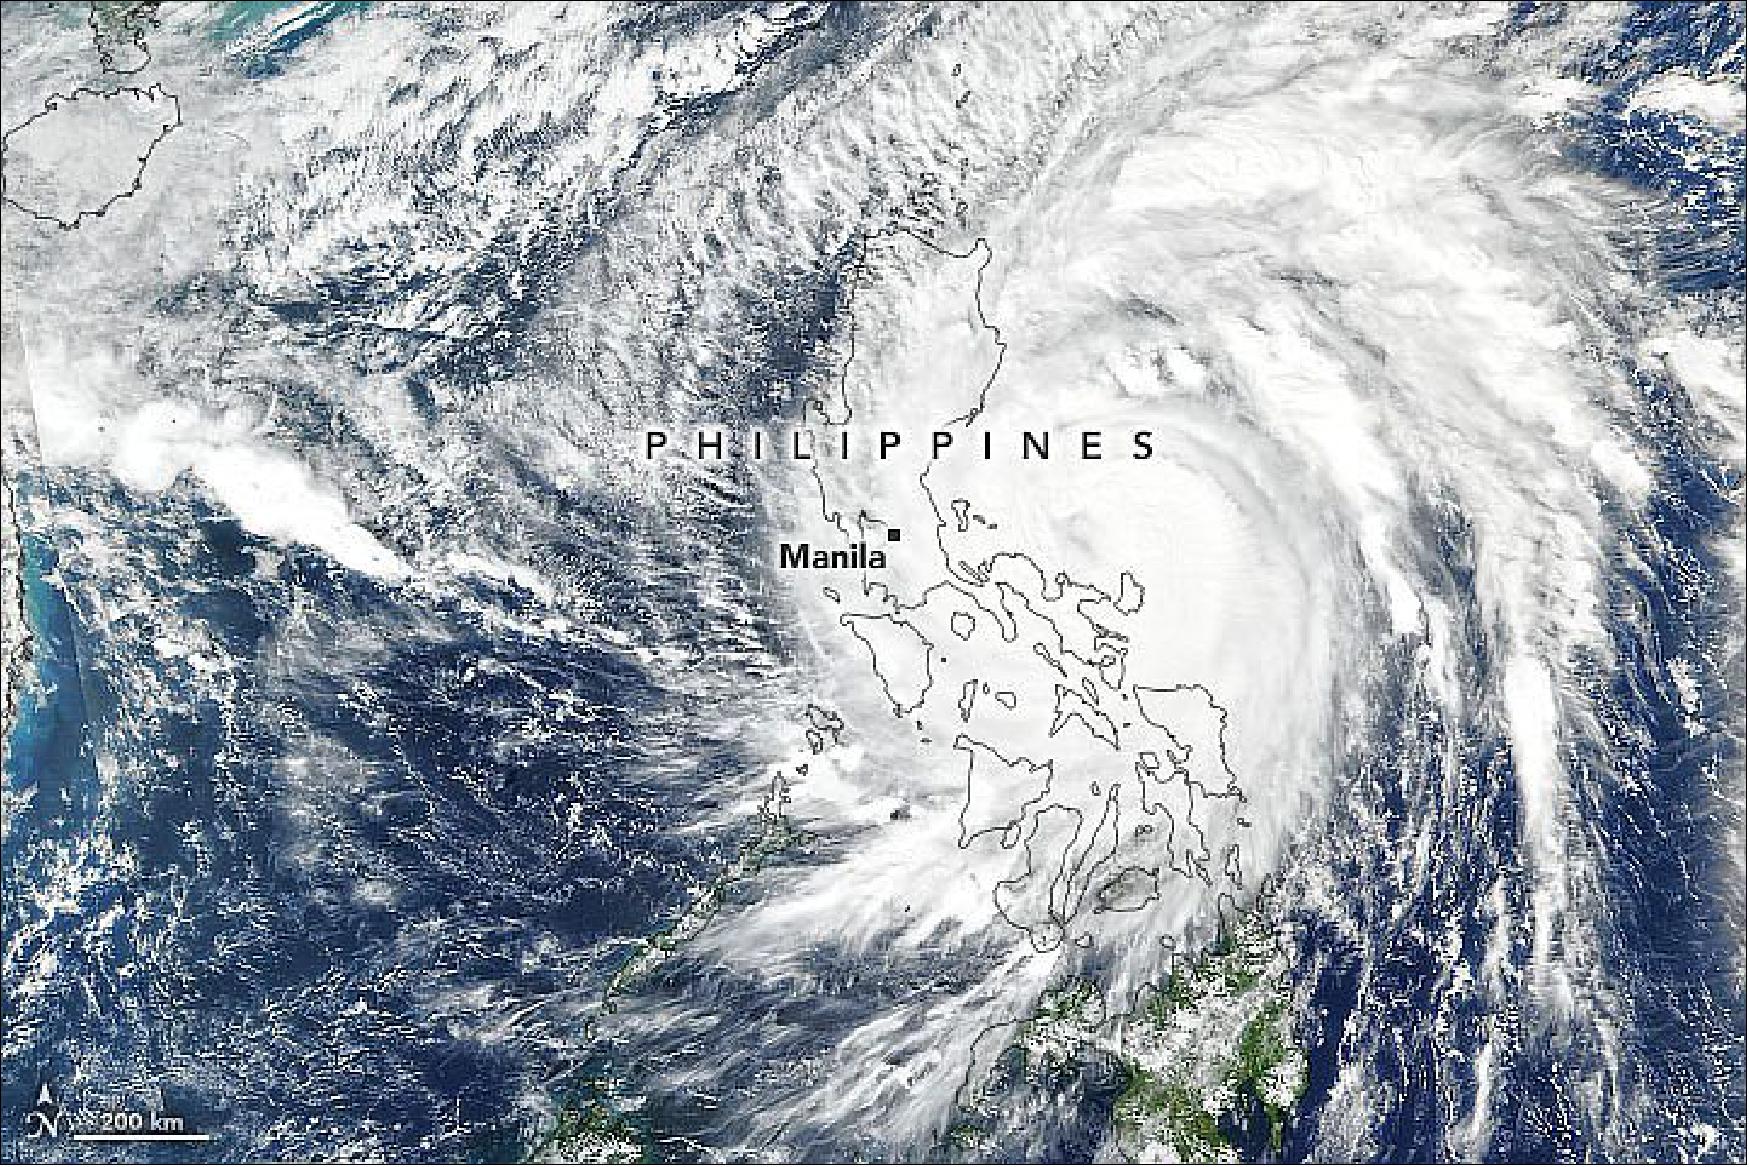 Figure 5: The image shows the typhoon on November 11 at 1:05 p.m. Philippines Standard Time (05:05 Universal Time), a few hours before the typhoon made landfall. The image was acquired by the Visible Infrared Imaging Radiometer Suite (VIIRS) on the Suomi NPP satellite (image credit: NASA Earth Observatory image by Joshua Stevens, using VIIRS data from NASA EOSDIS/LANCE and GIBS/Worldview and the Suomi National Polar-orbiting Partnership. Story by Kasha Patel)